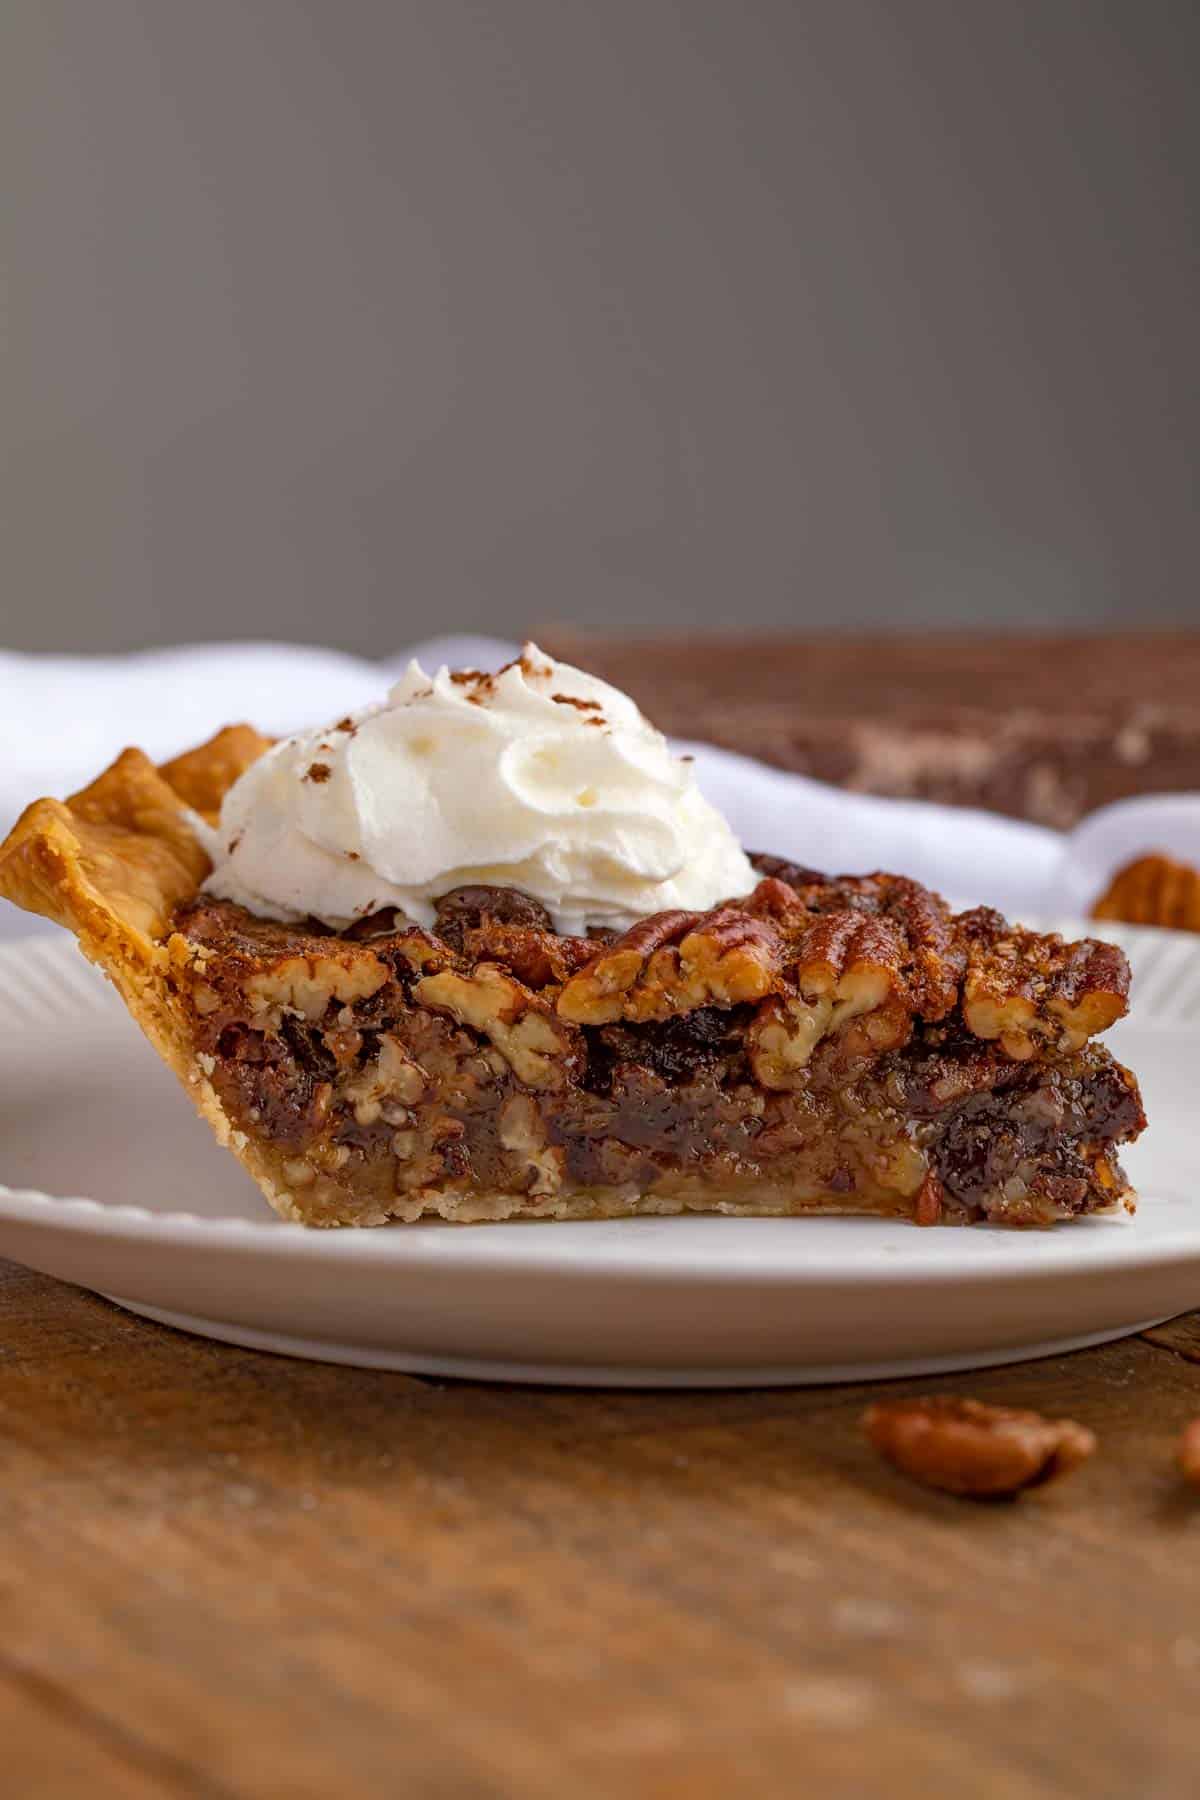 Rich and EASY Chocolate Pecan Pie - PERFECT Holiday Pie Recipe